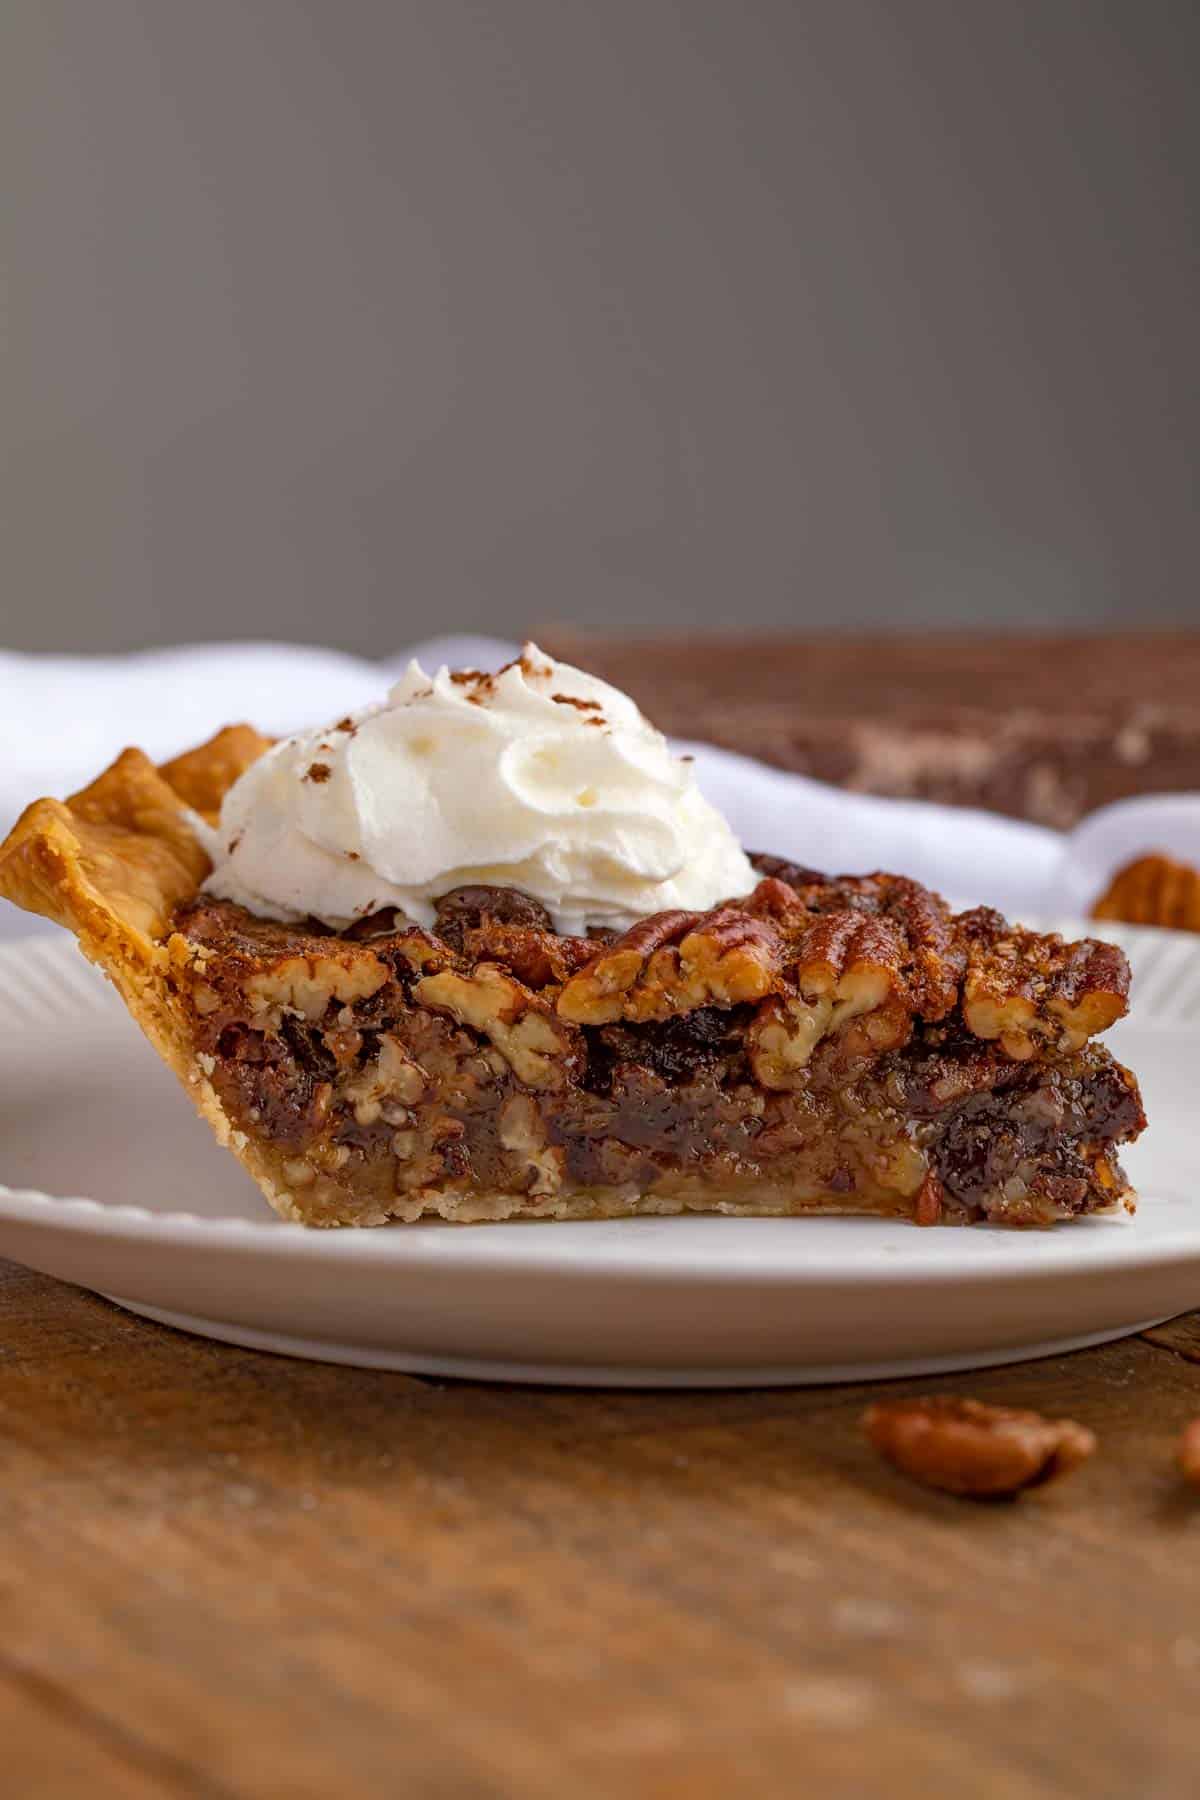 Rich and EASY Chocolate Pecan Pie - PERFECT Holiday Pie Recipe